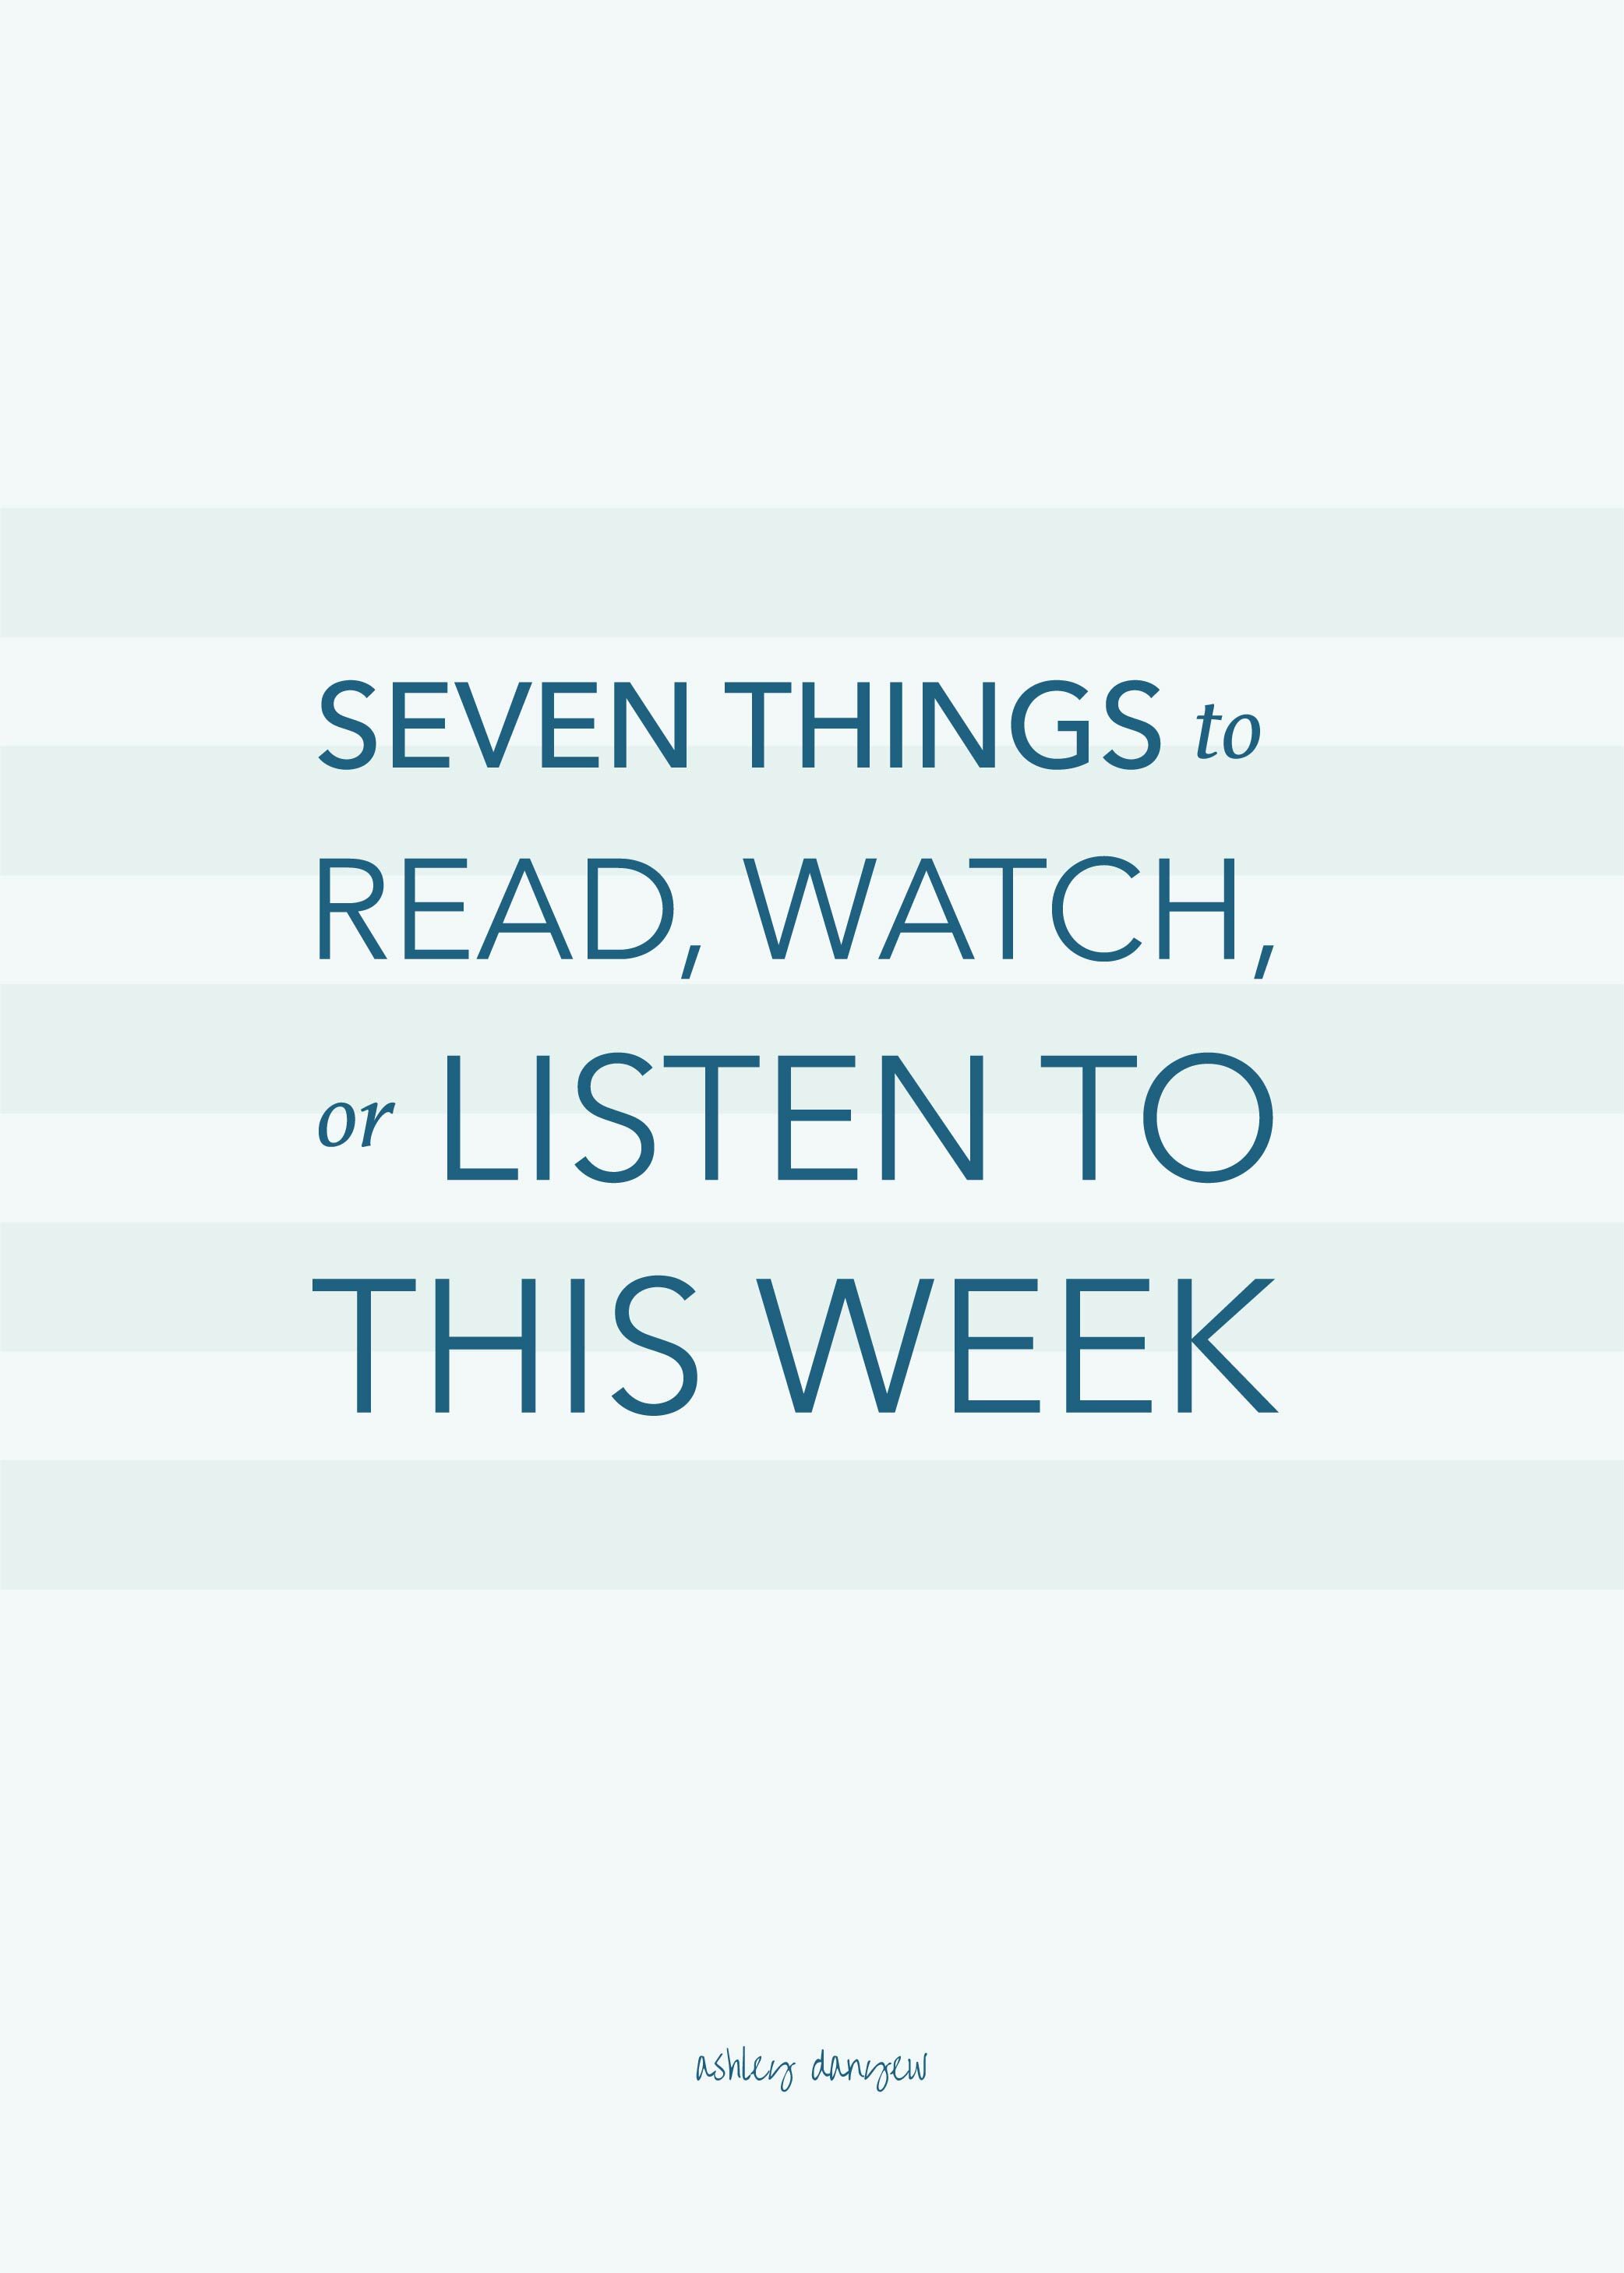 Seven Things to Read, Watch, or Listen to This Week